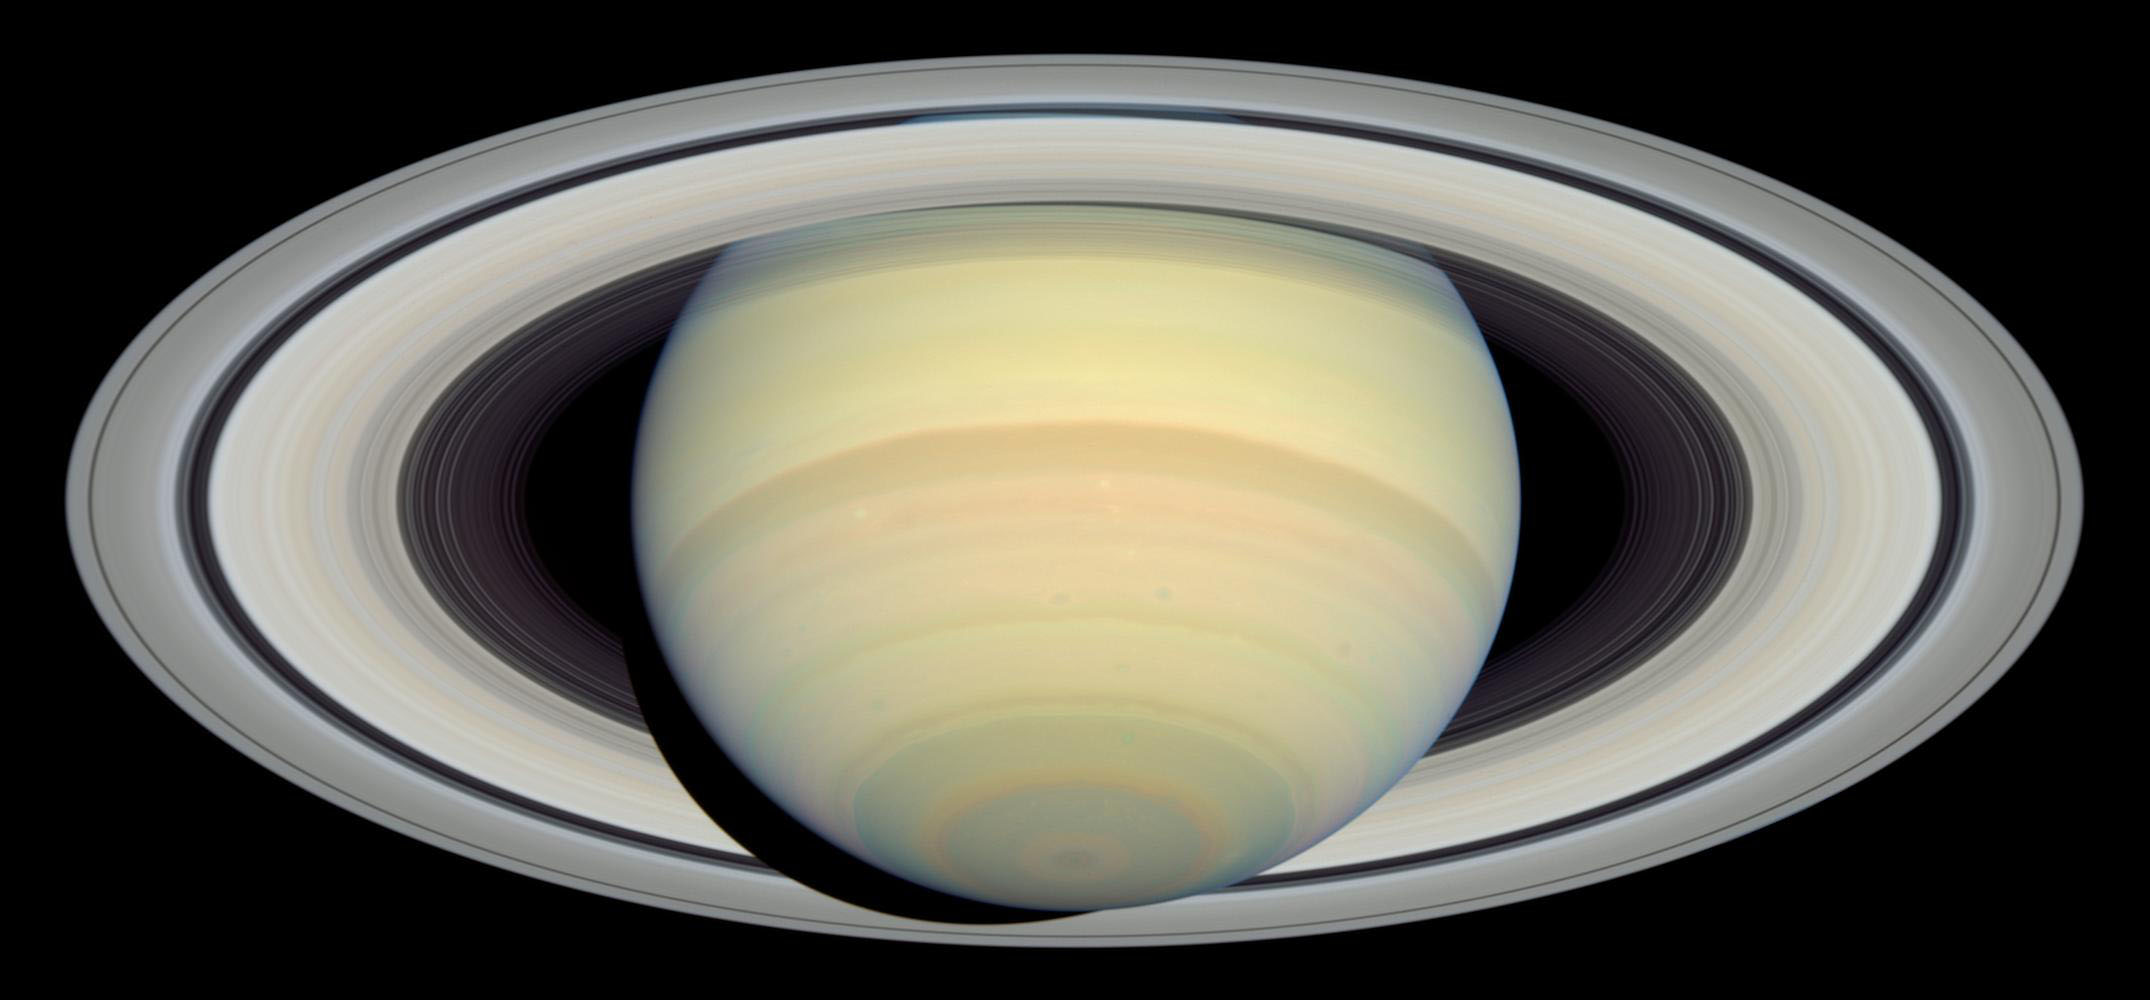 Saturn and its rings. The planet appears as though it is tilted backward, appearing to reveal the underside of its rings. Overall Saturn is yellow with bands of red, yellowish-brown, light orange, pink, and blue.